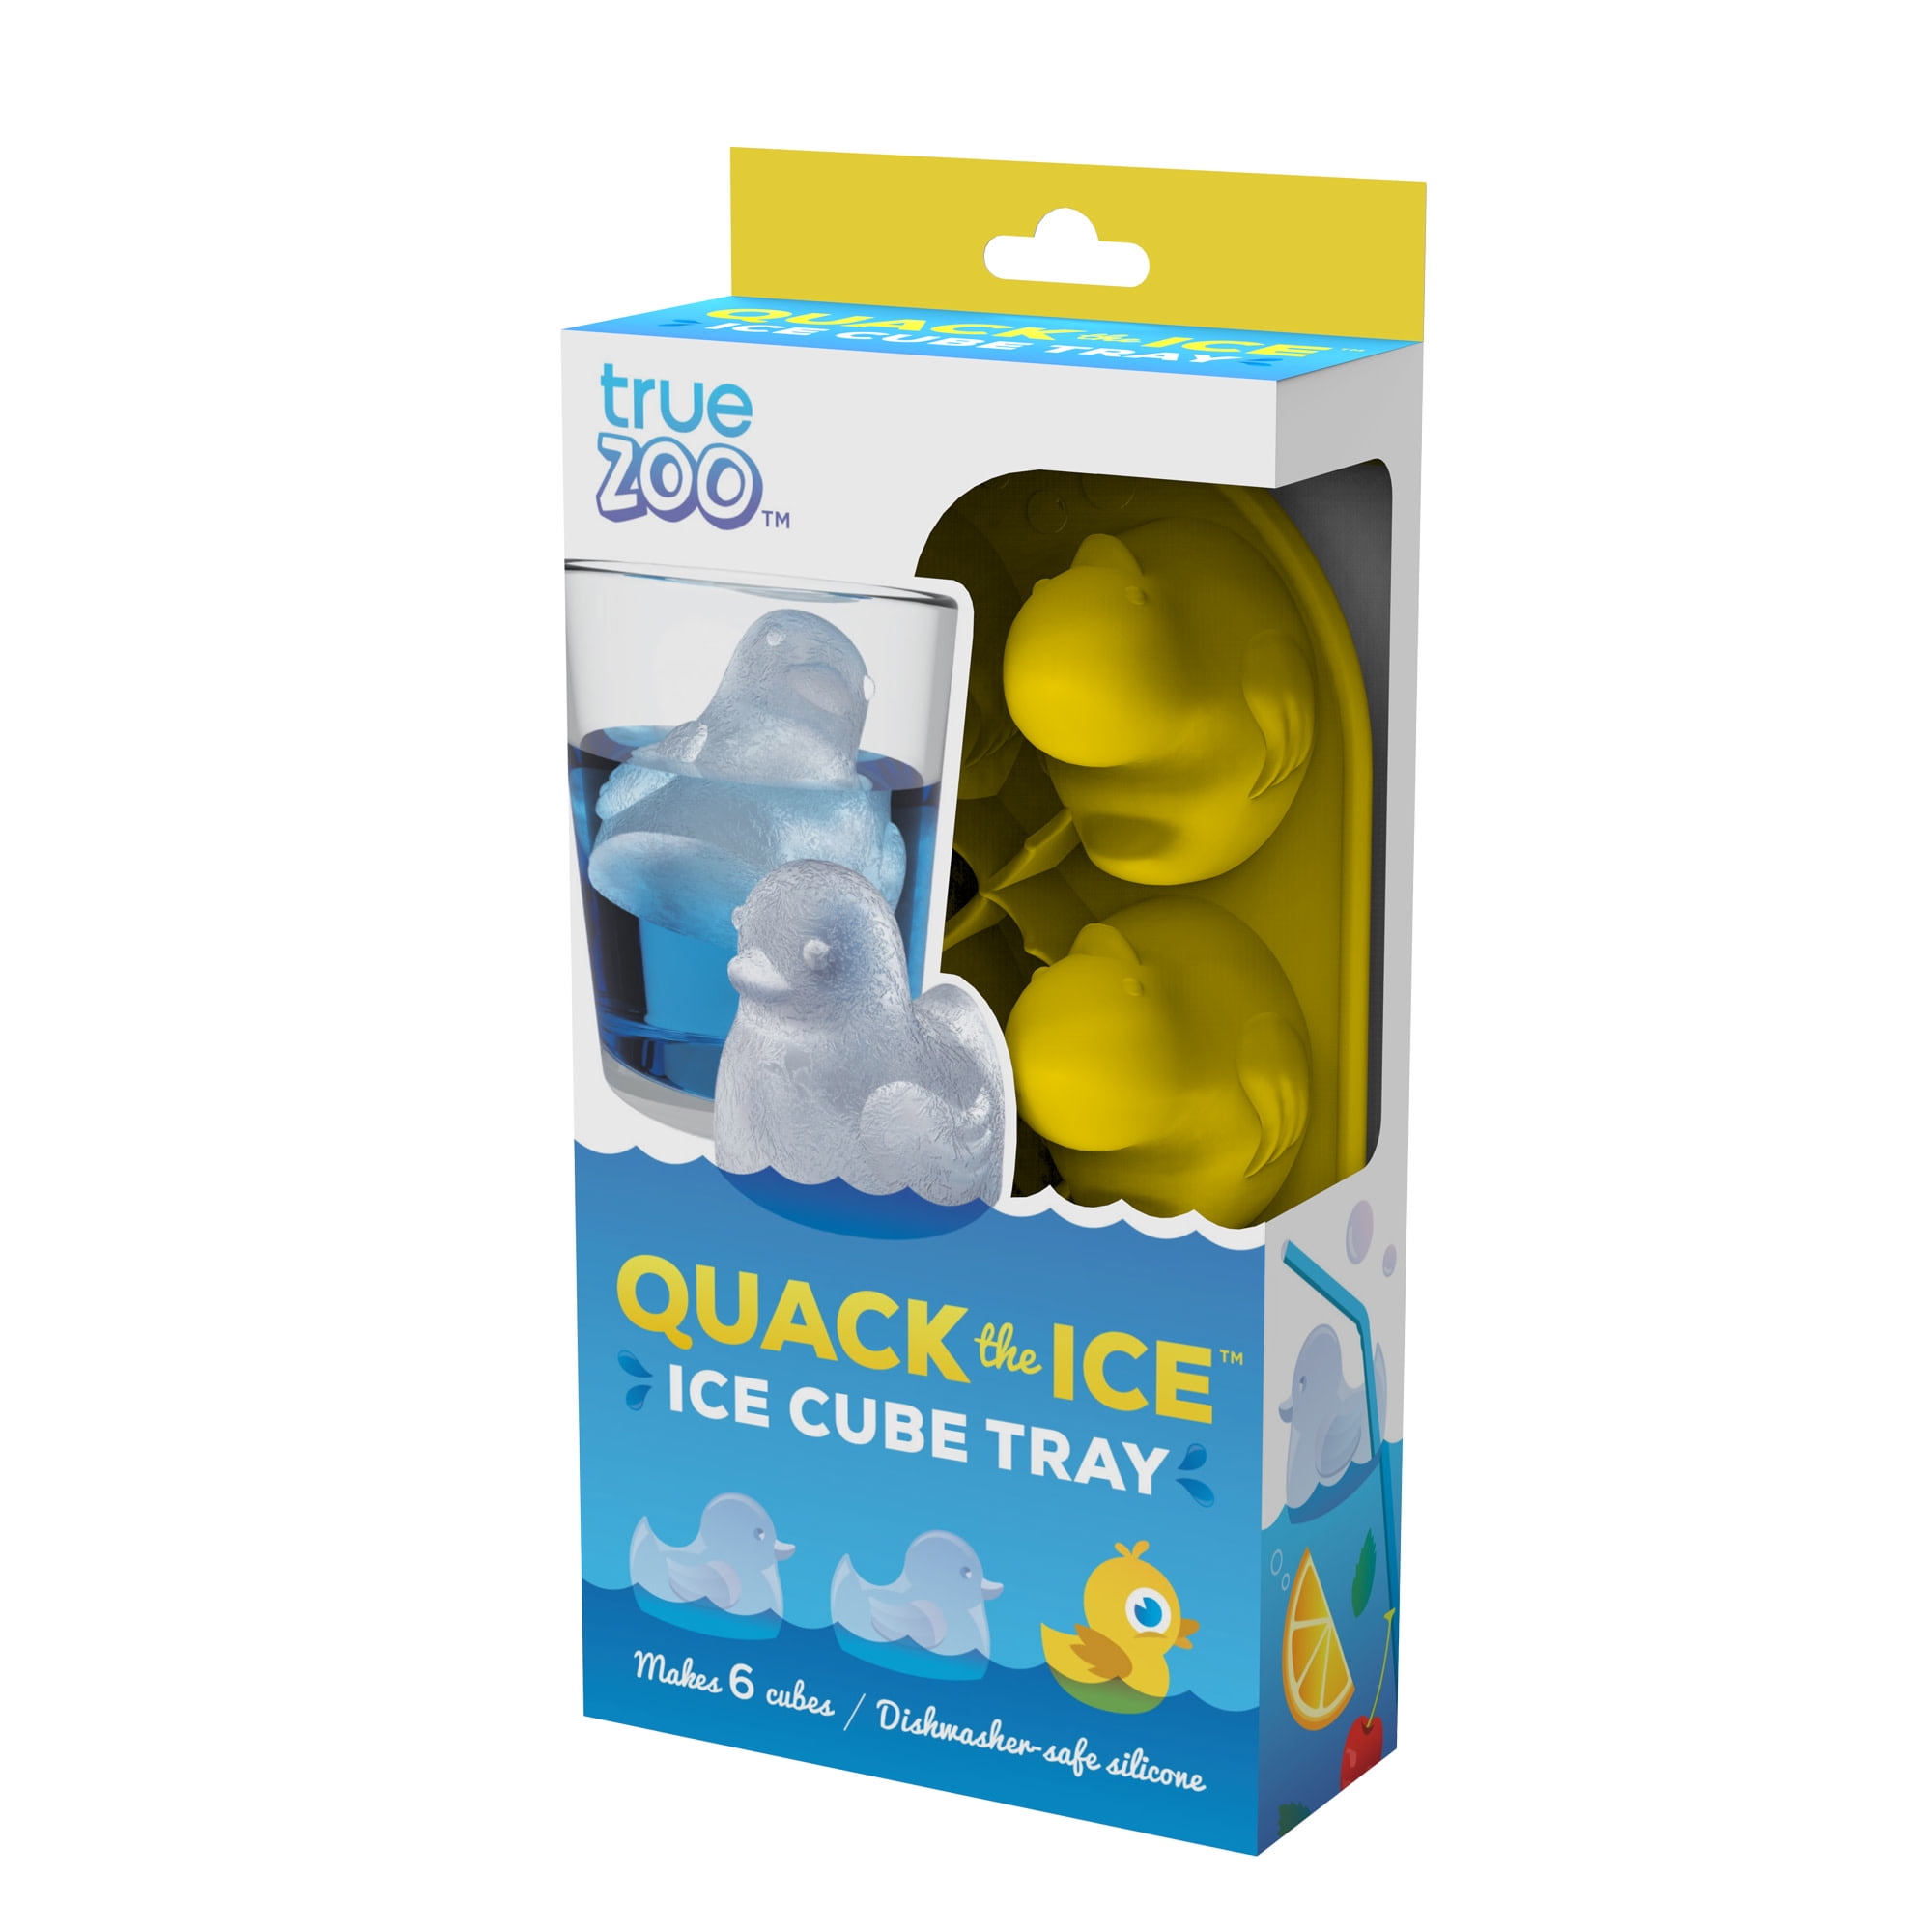 Quack the Ice Silicone Rubber Ducky (Duck) Ice Cube Tray • Chicago Bar  Store - Bar tools, accessories, equipment, and gifts